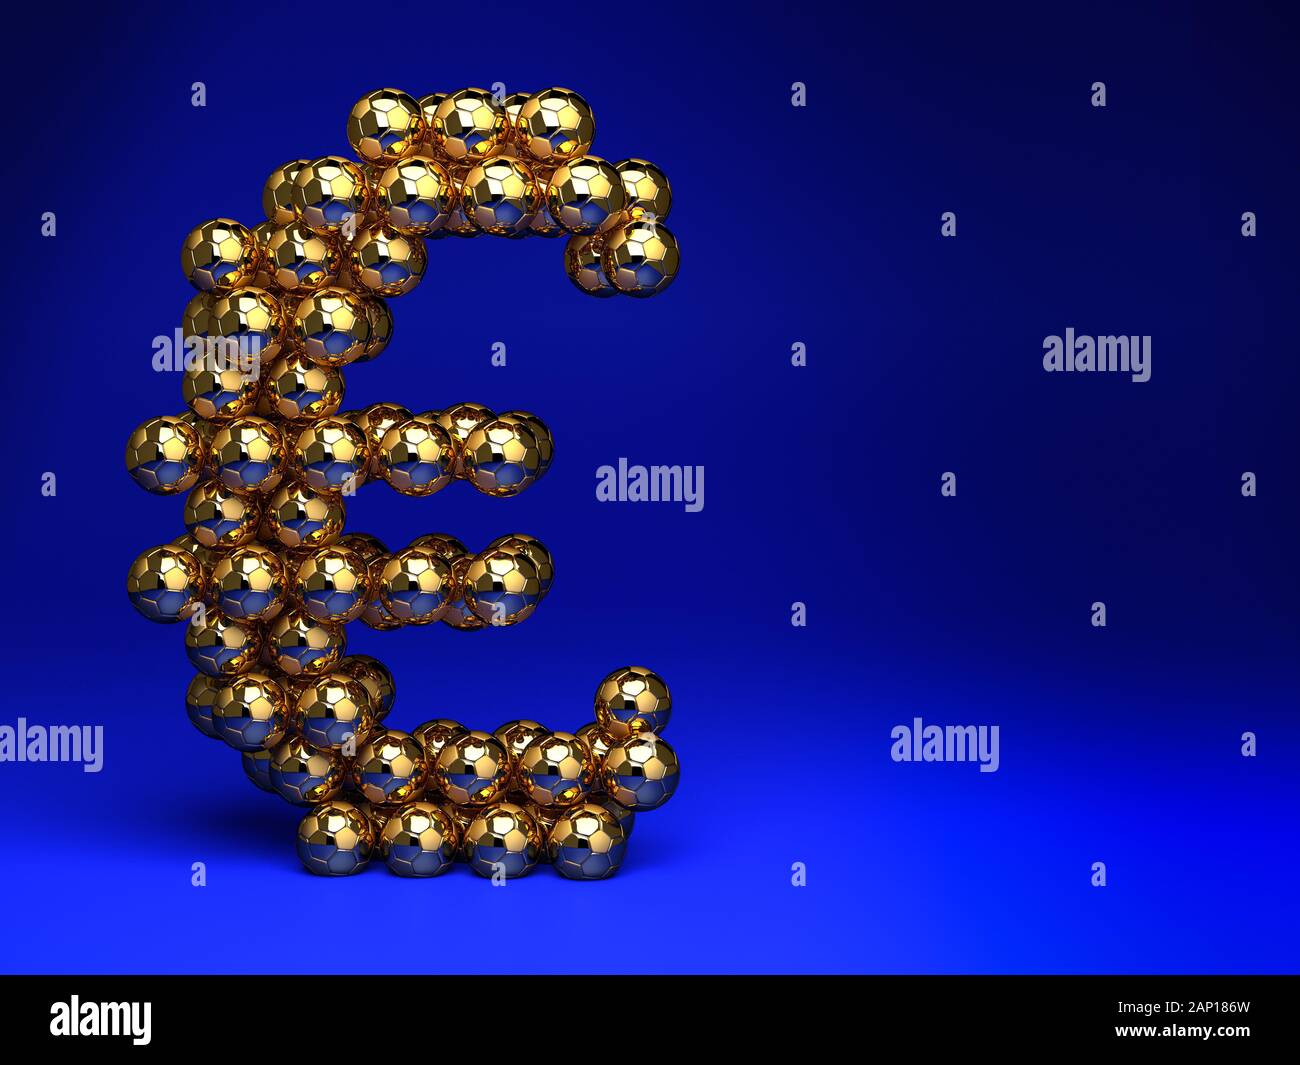 3D rendering: Golden Soccer balls forming a Euro sign. Big Business in sports, football, soccer. Blue Background. Stock Photo